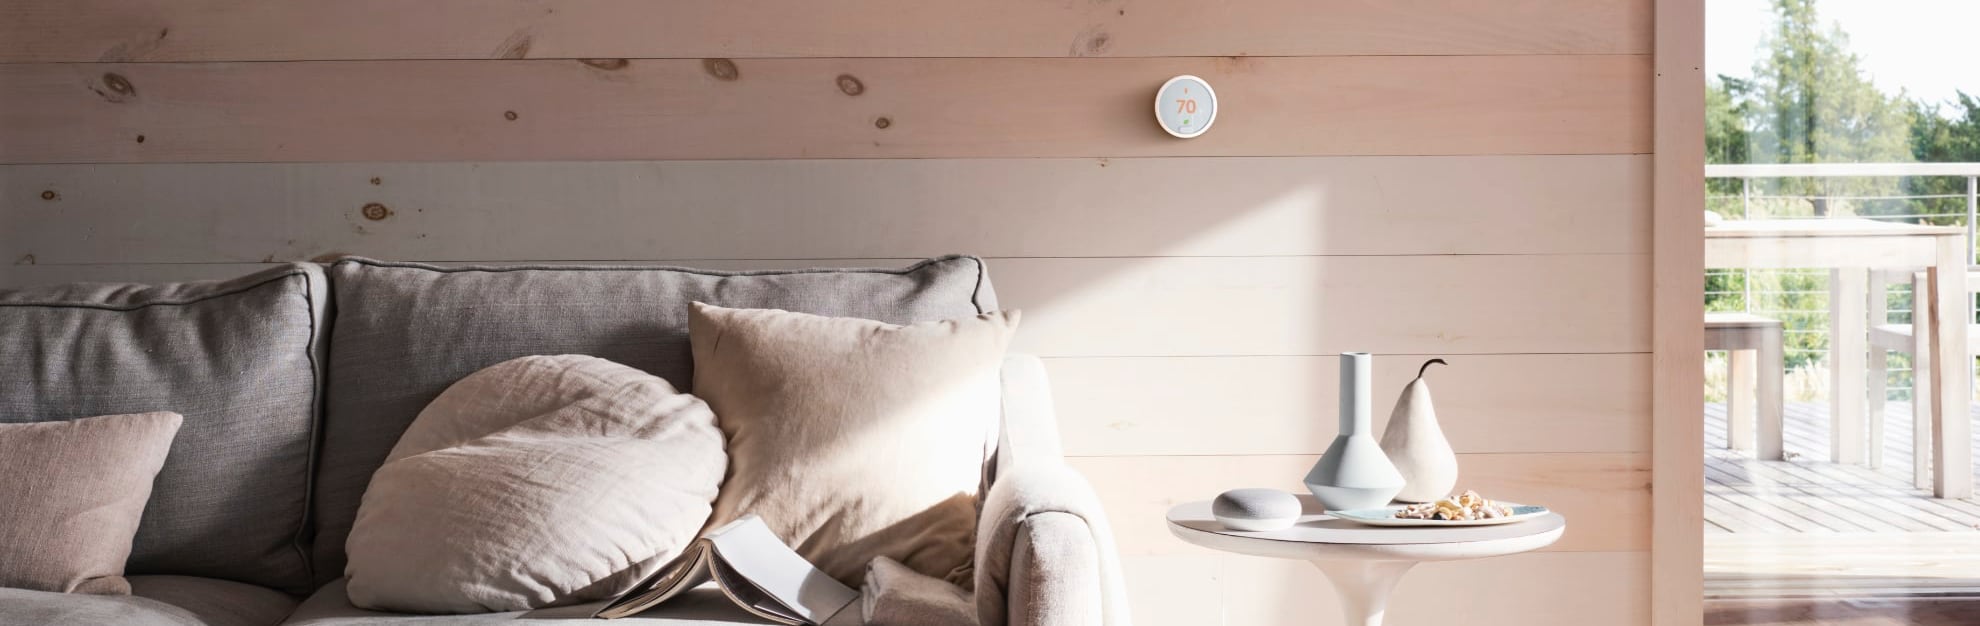 Vivint Home Automation in Jamestown